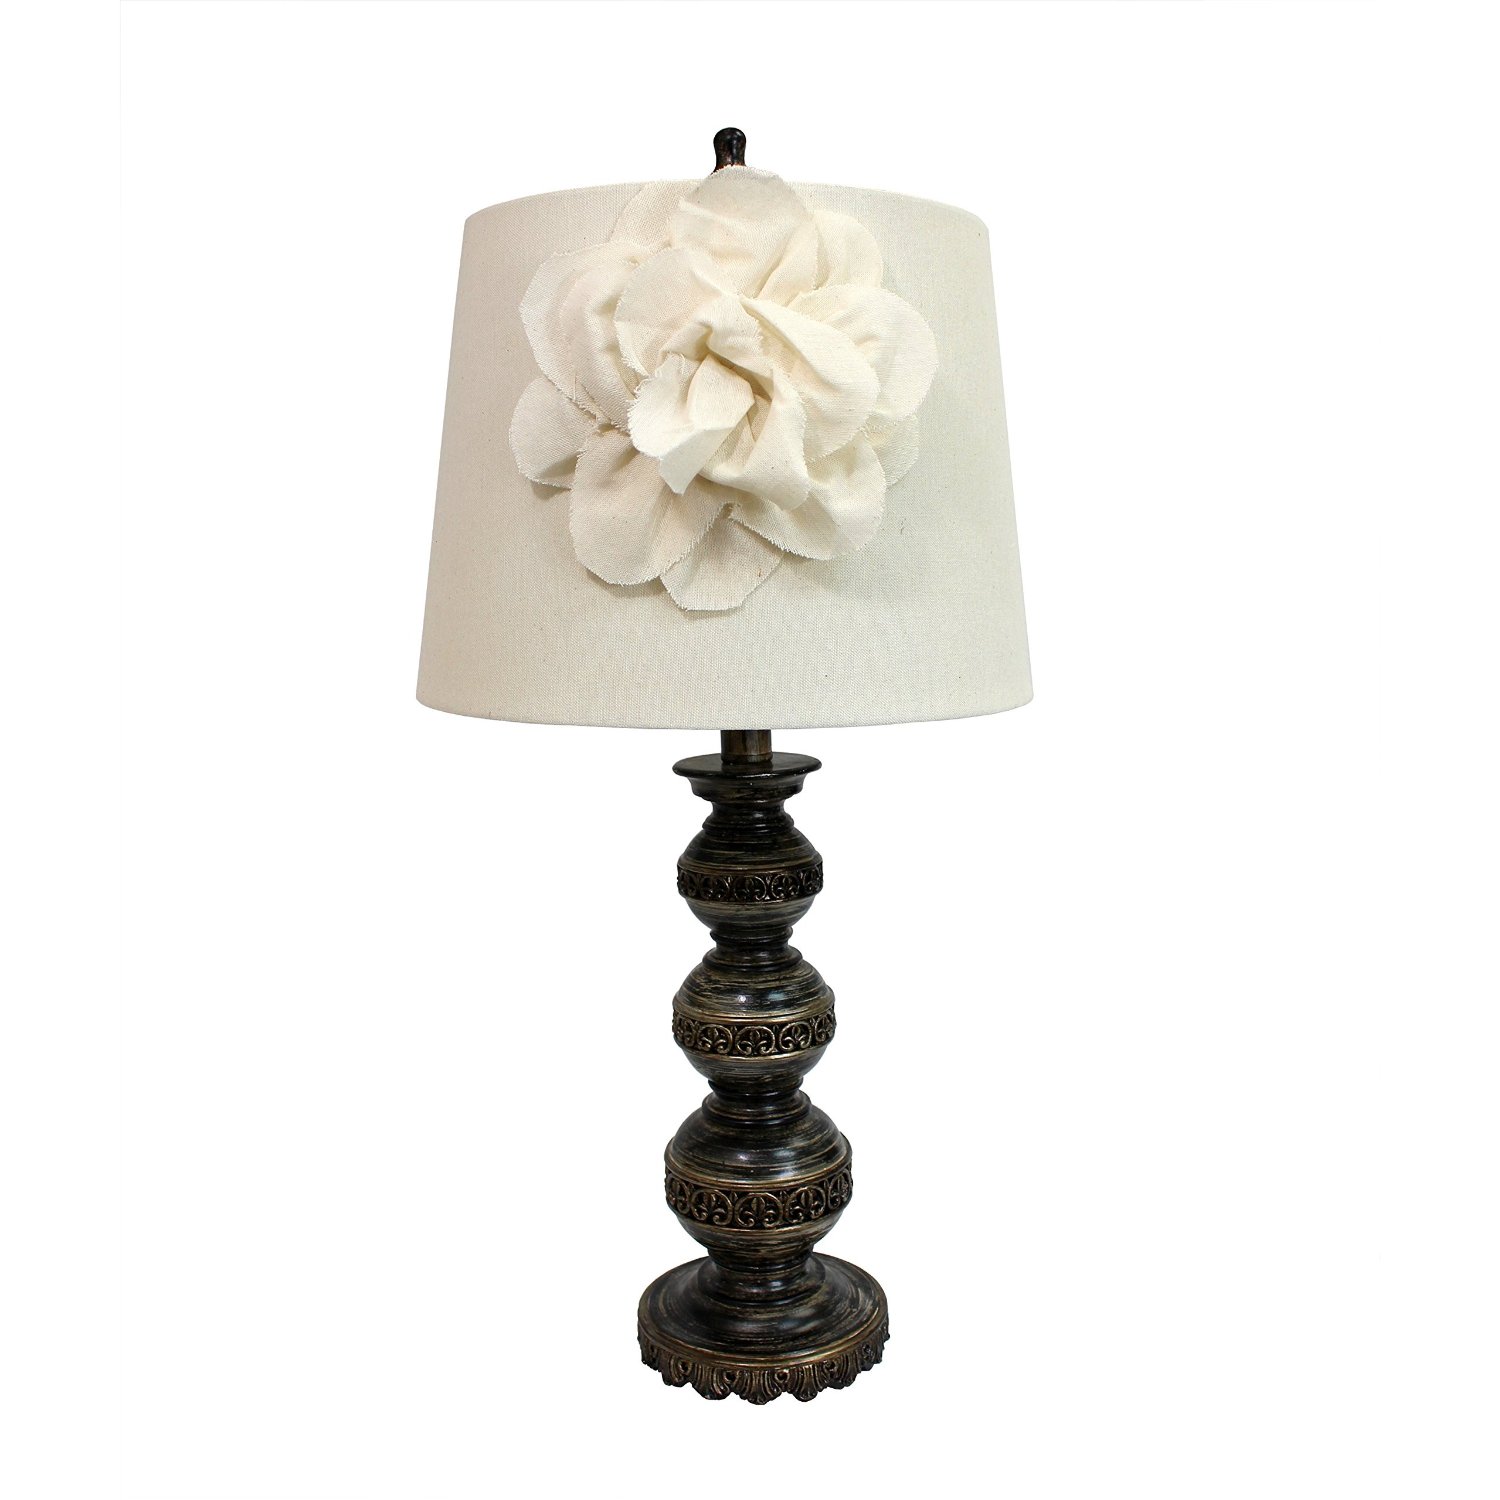 Elegant Designs Aged Bronze Stacked Ball Lamp with Couture Linen Flower Shade